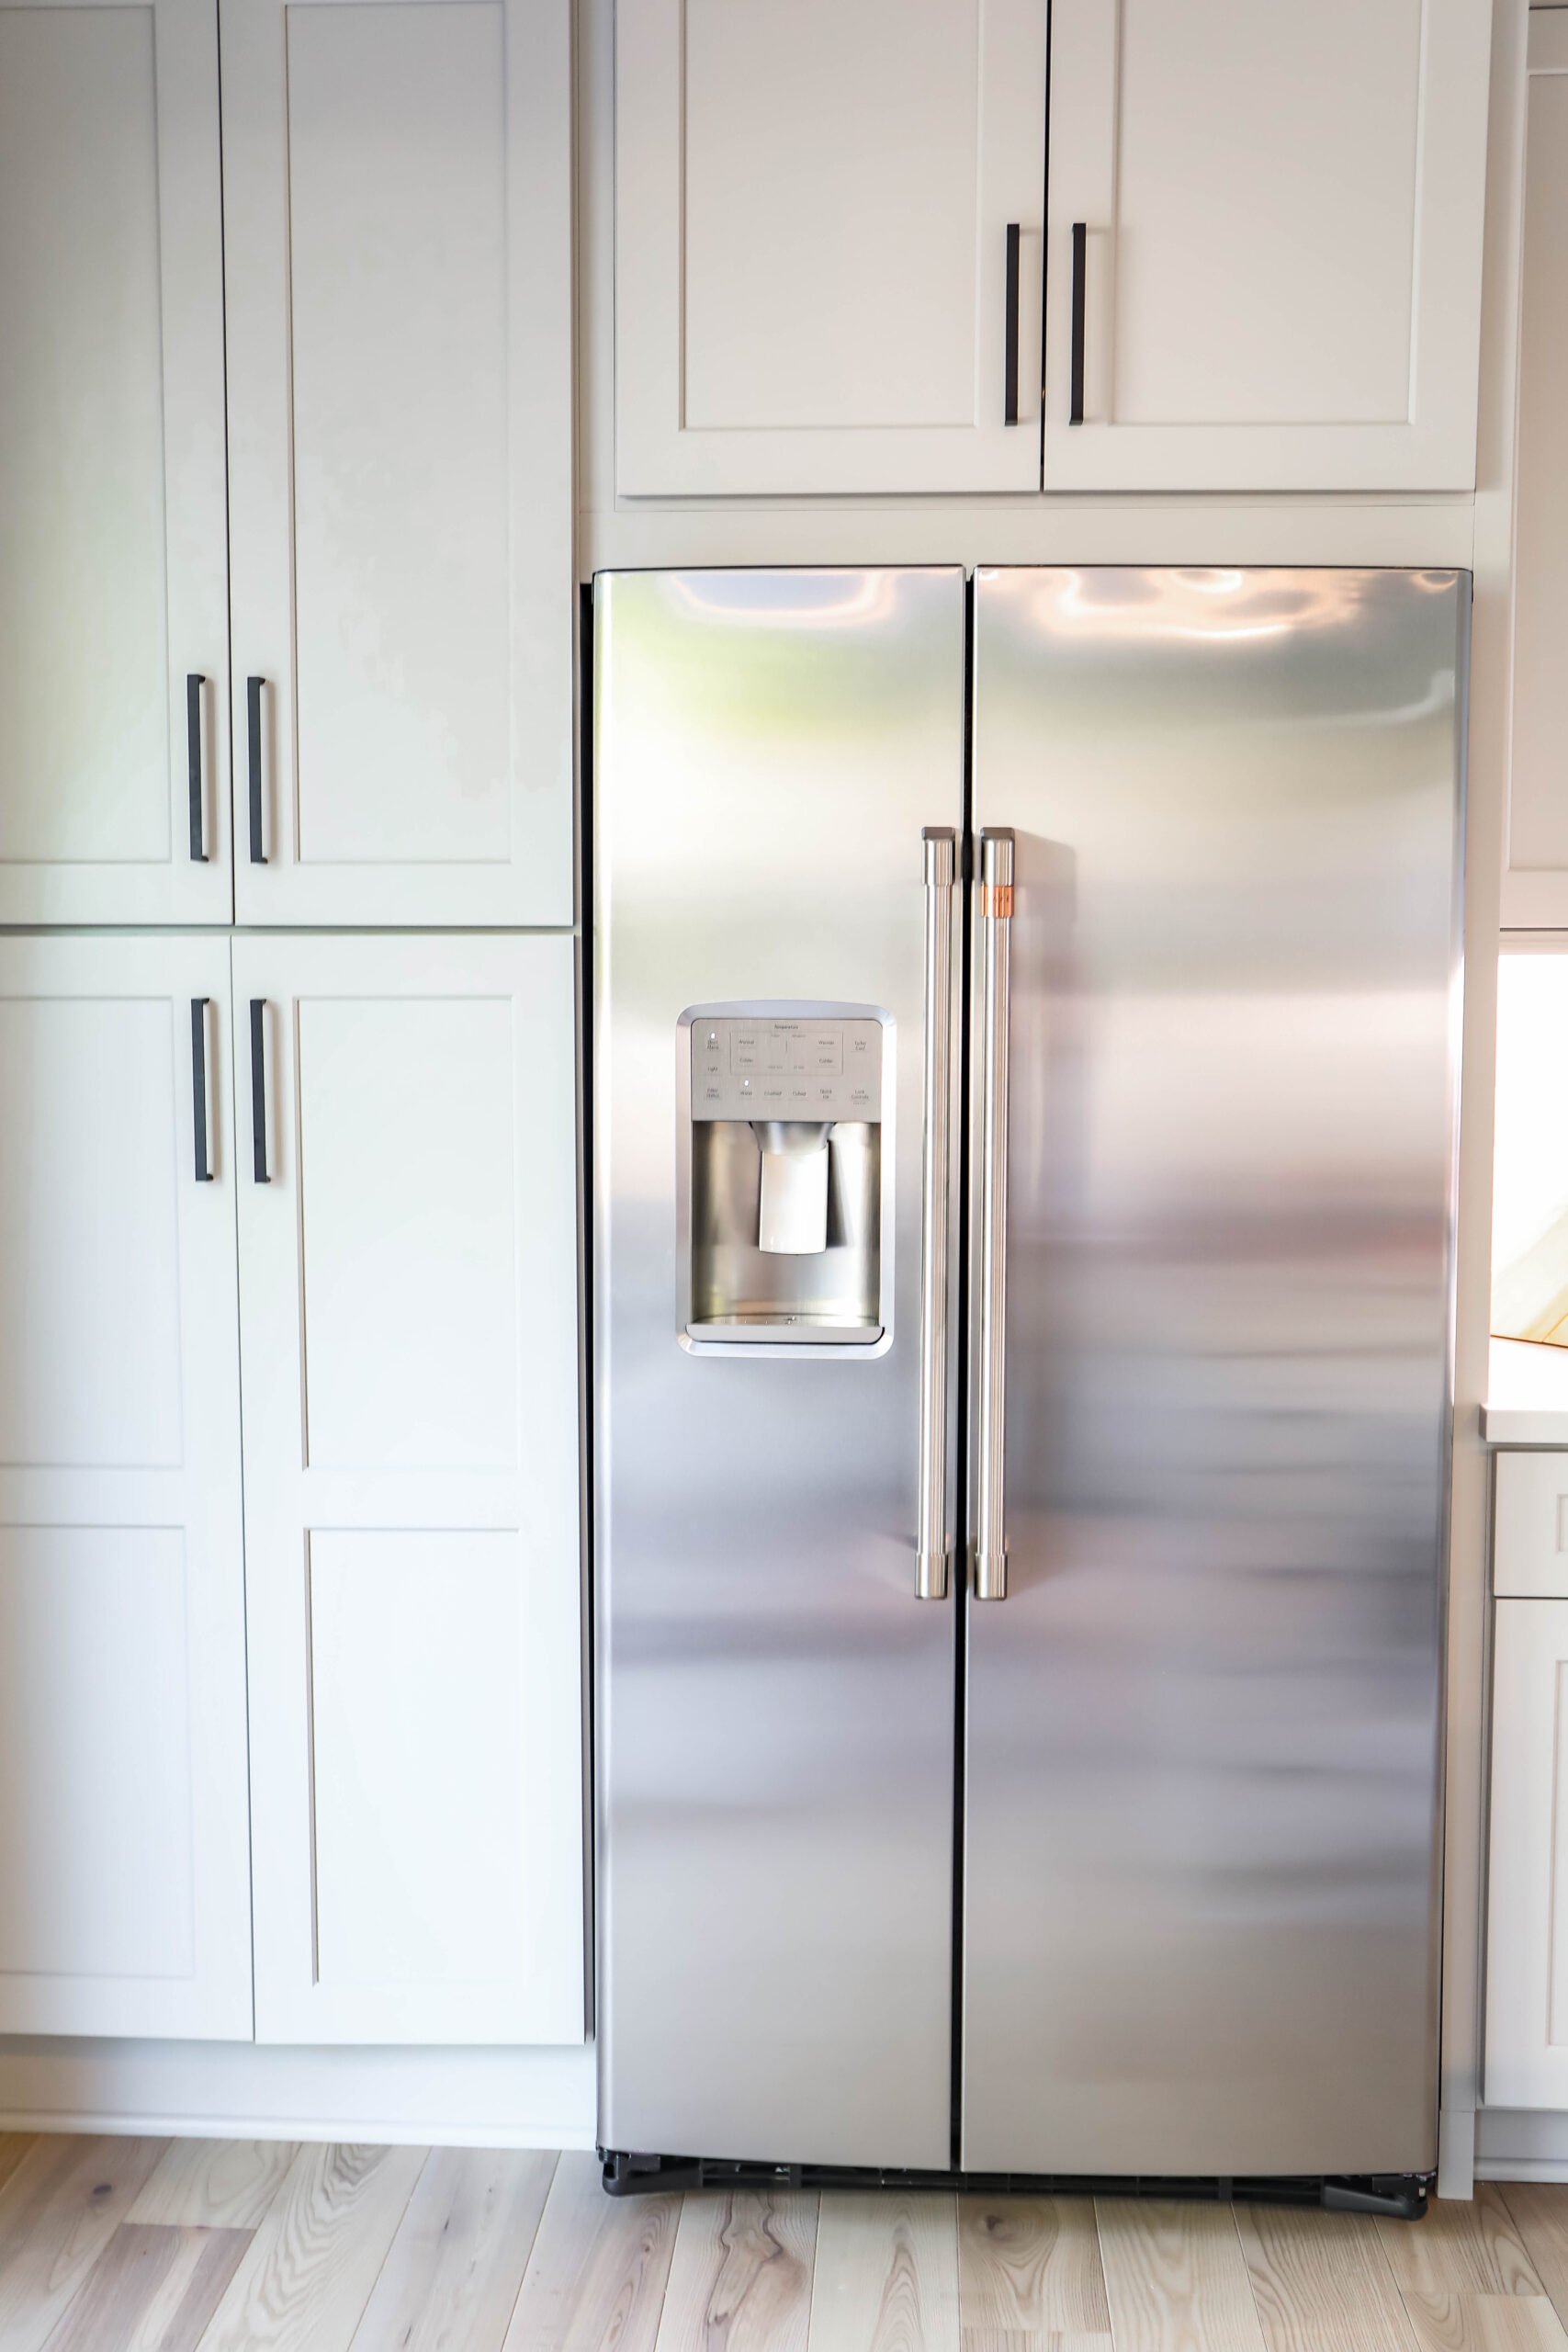 Cafe Appliances: The details, a full review and how they fit into this light grey kitchen